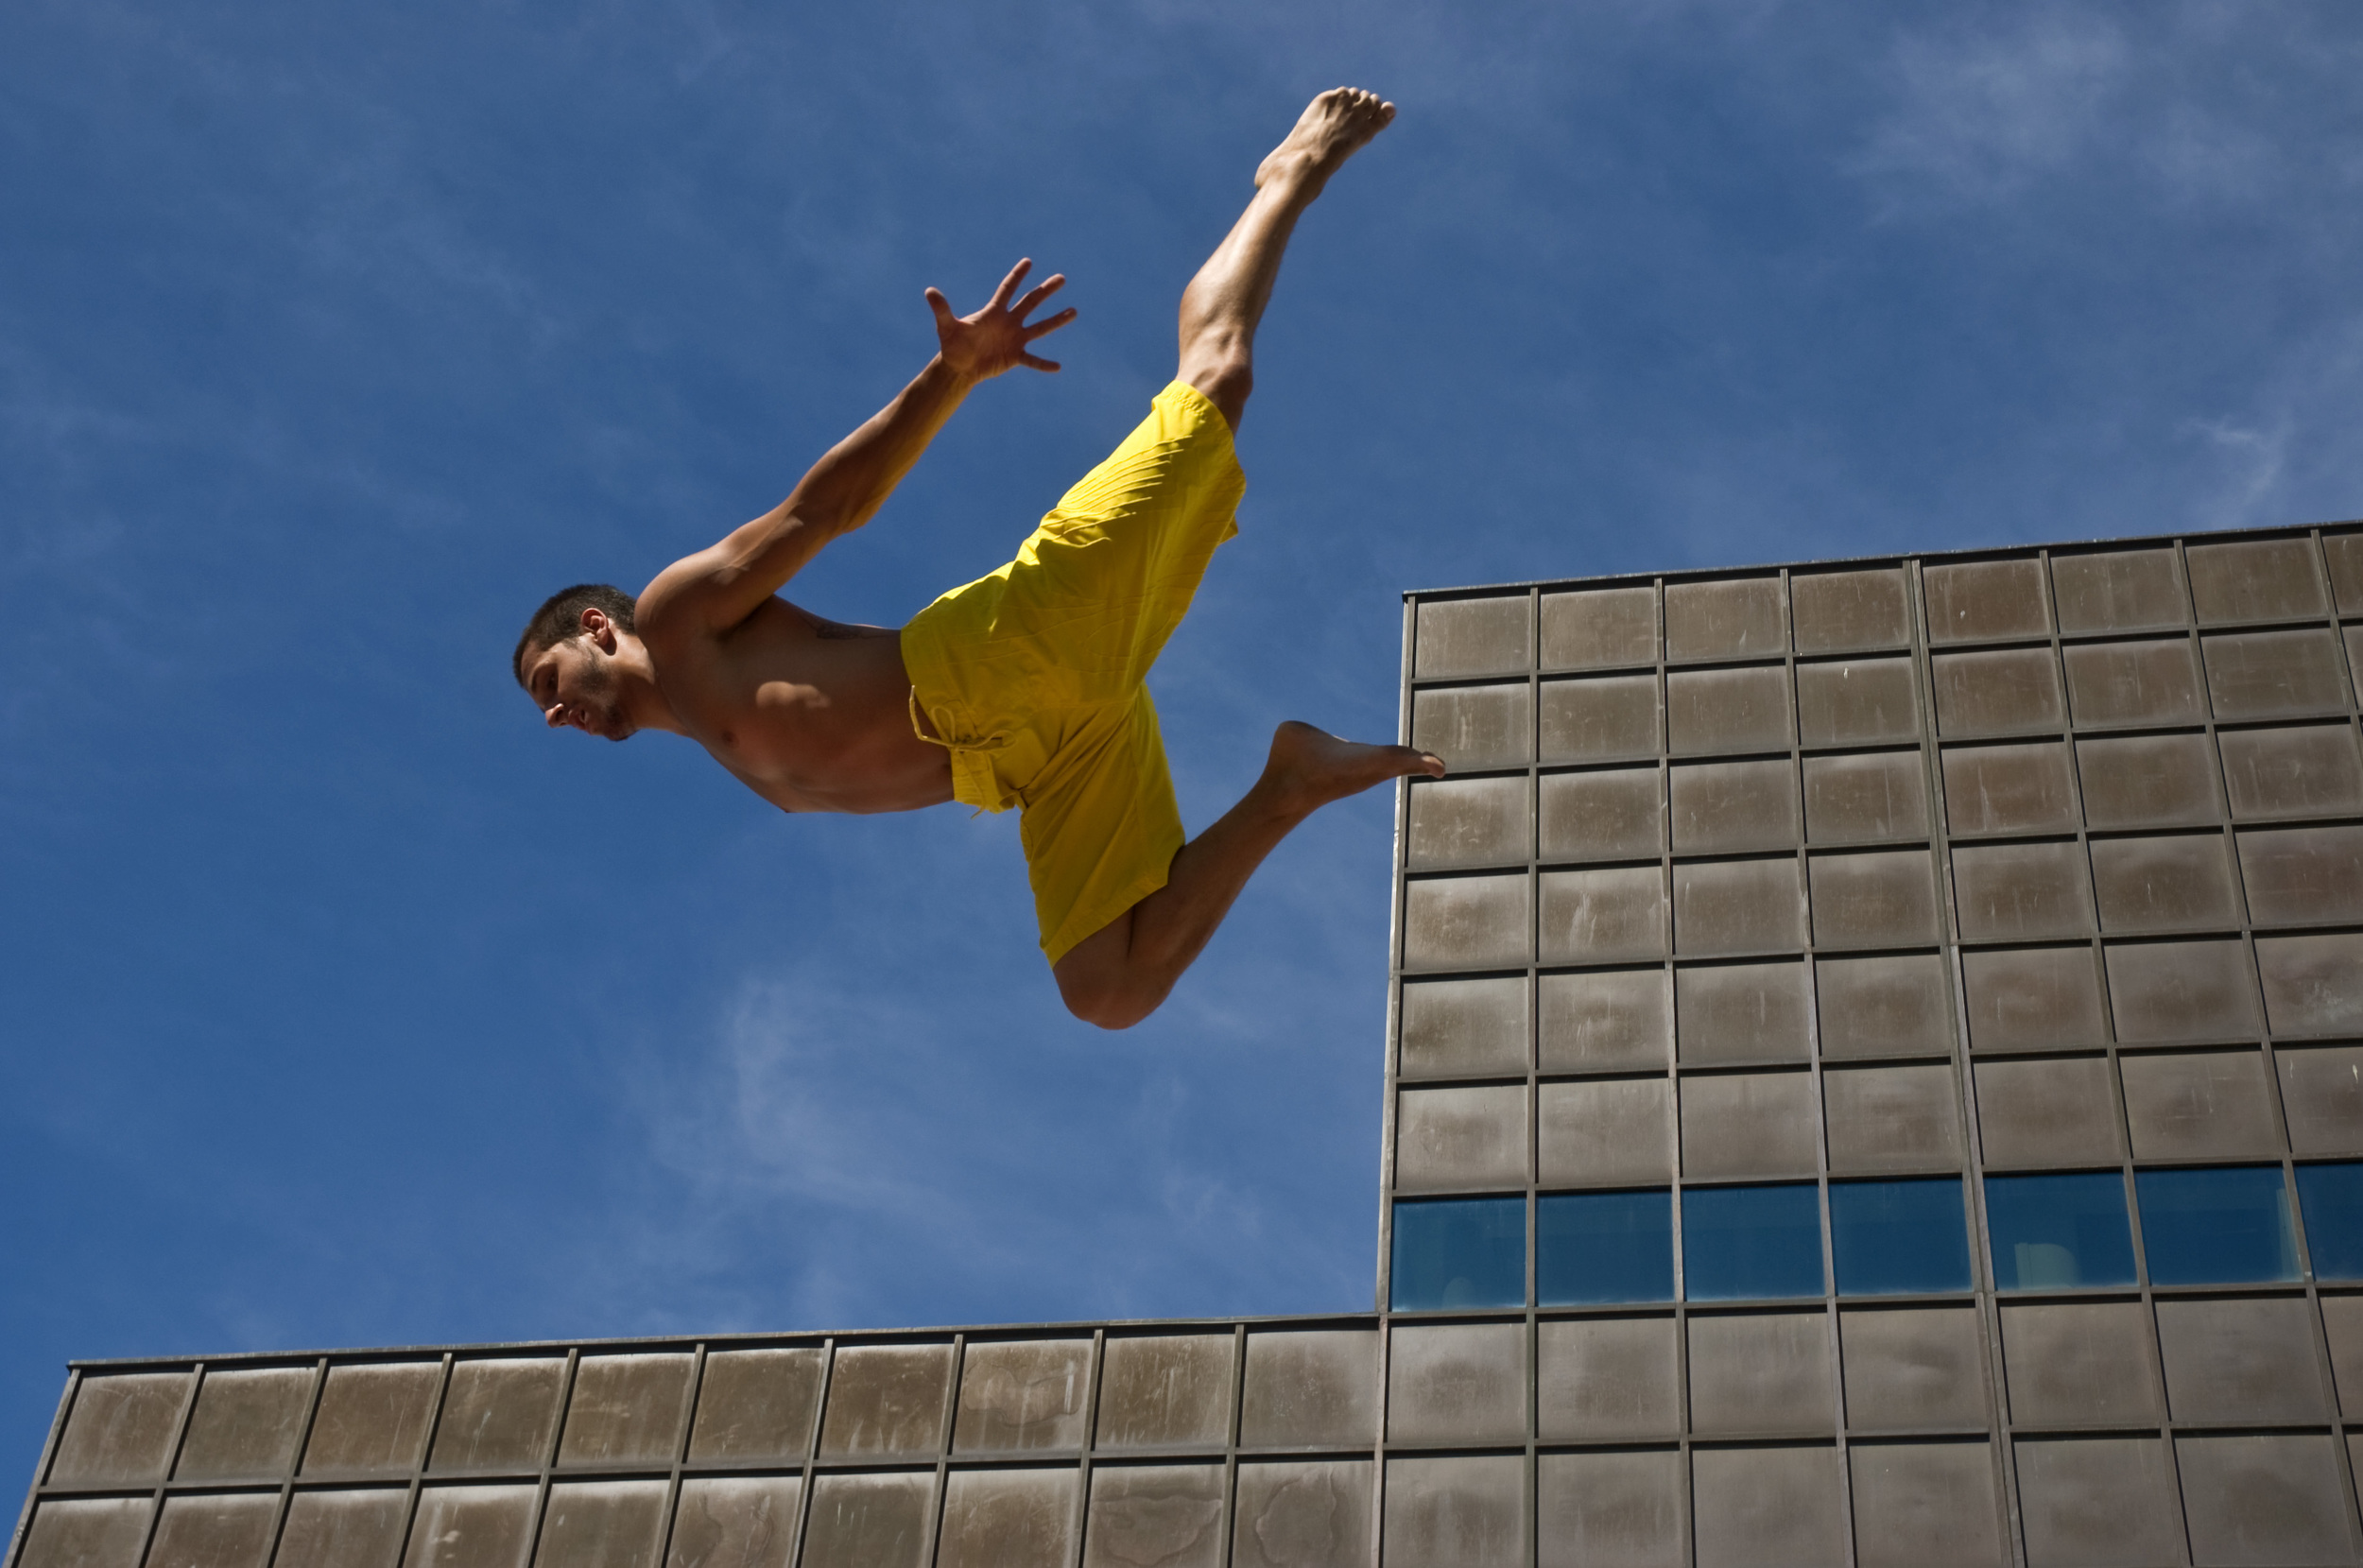  An aerial performer practices on a trampoline before the start of the Francofolies, a huge street celebration of French Canadian culture in Montreal, Quebec. 